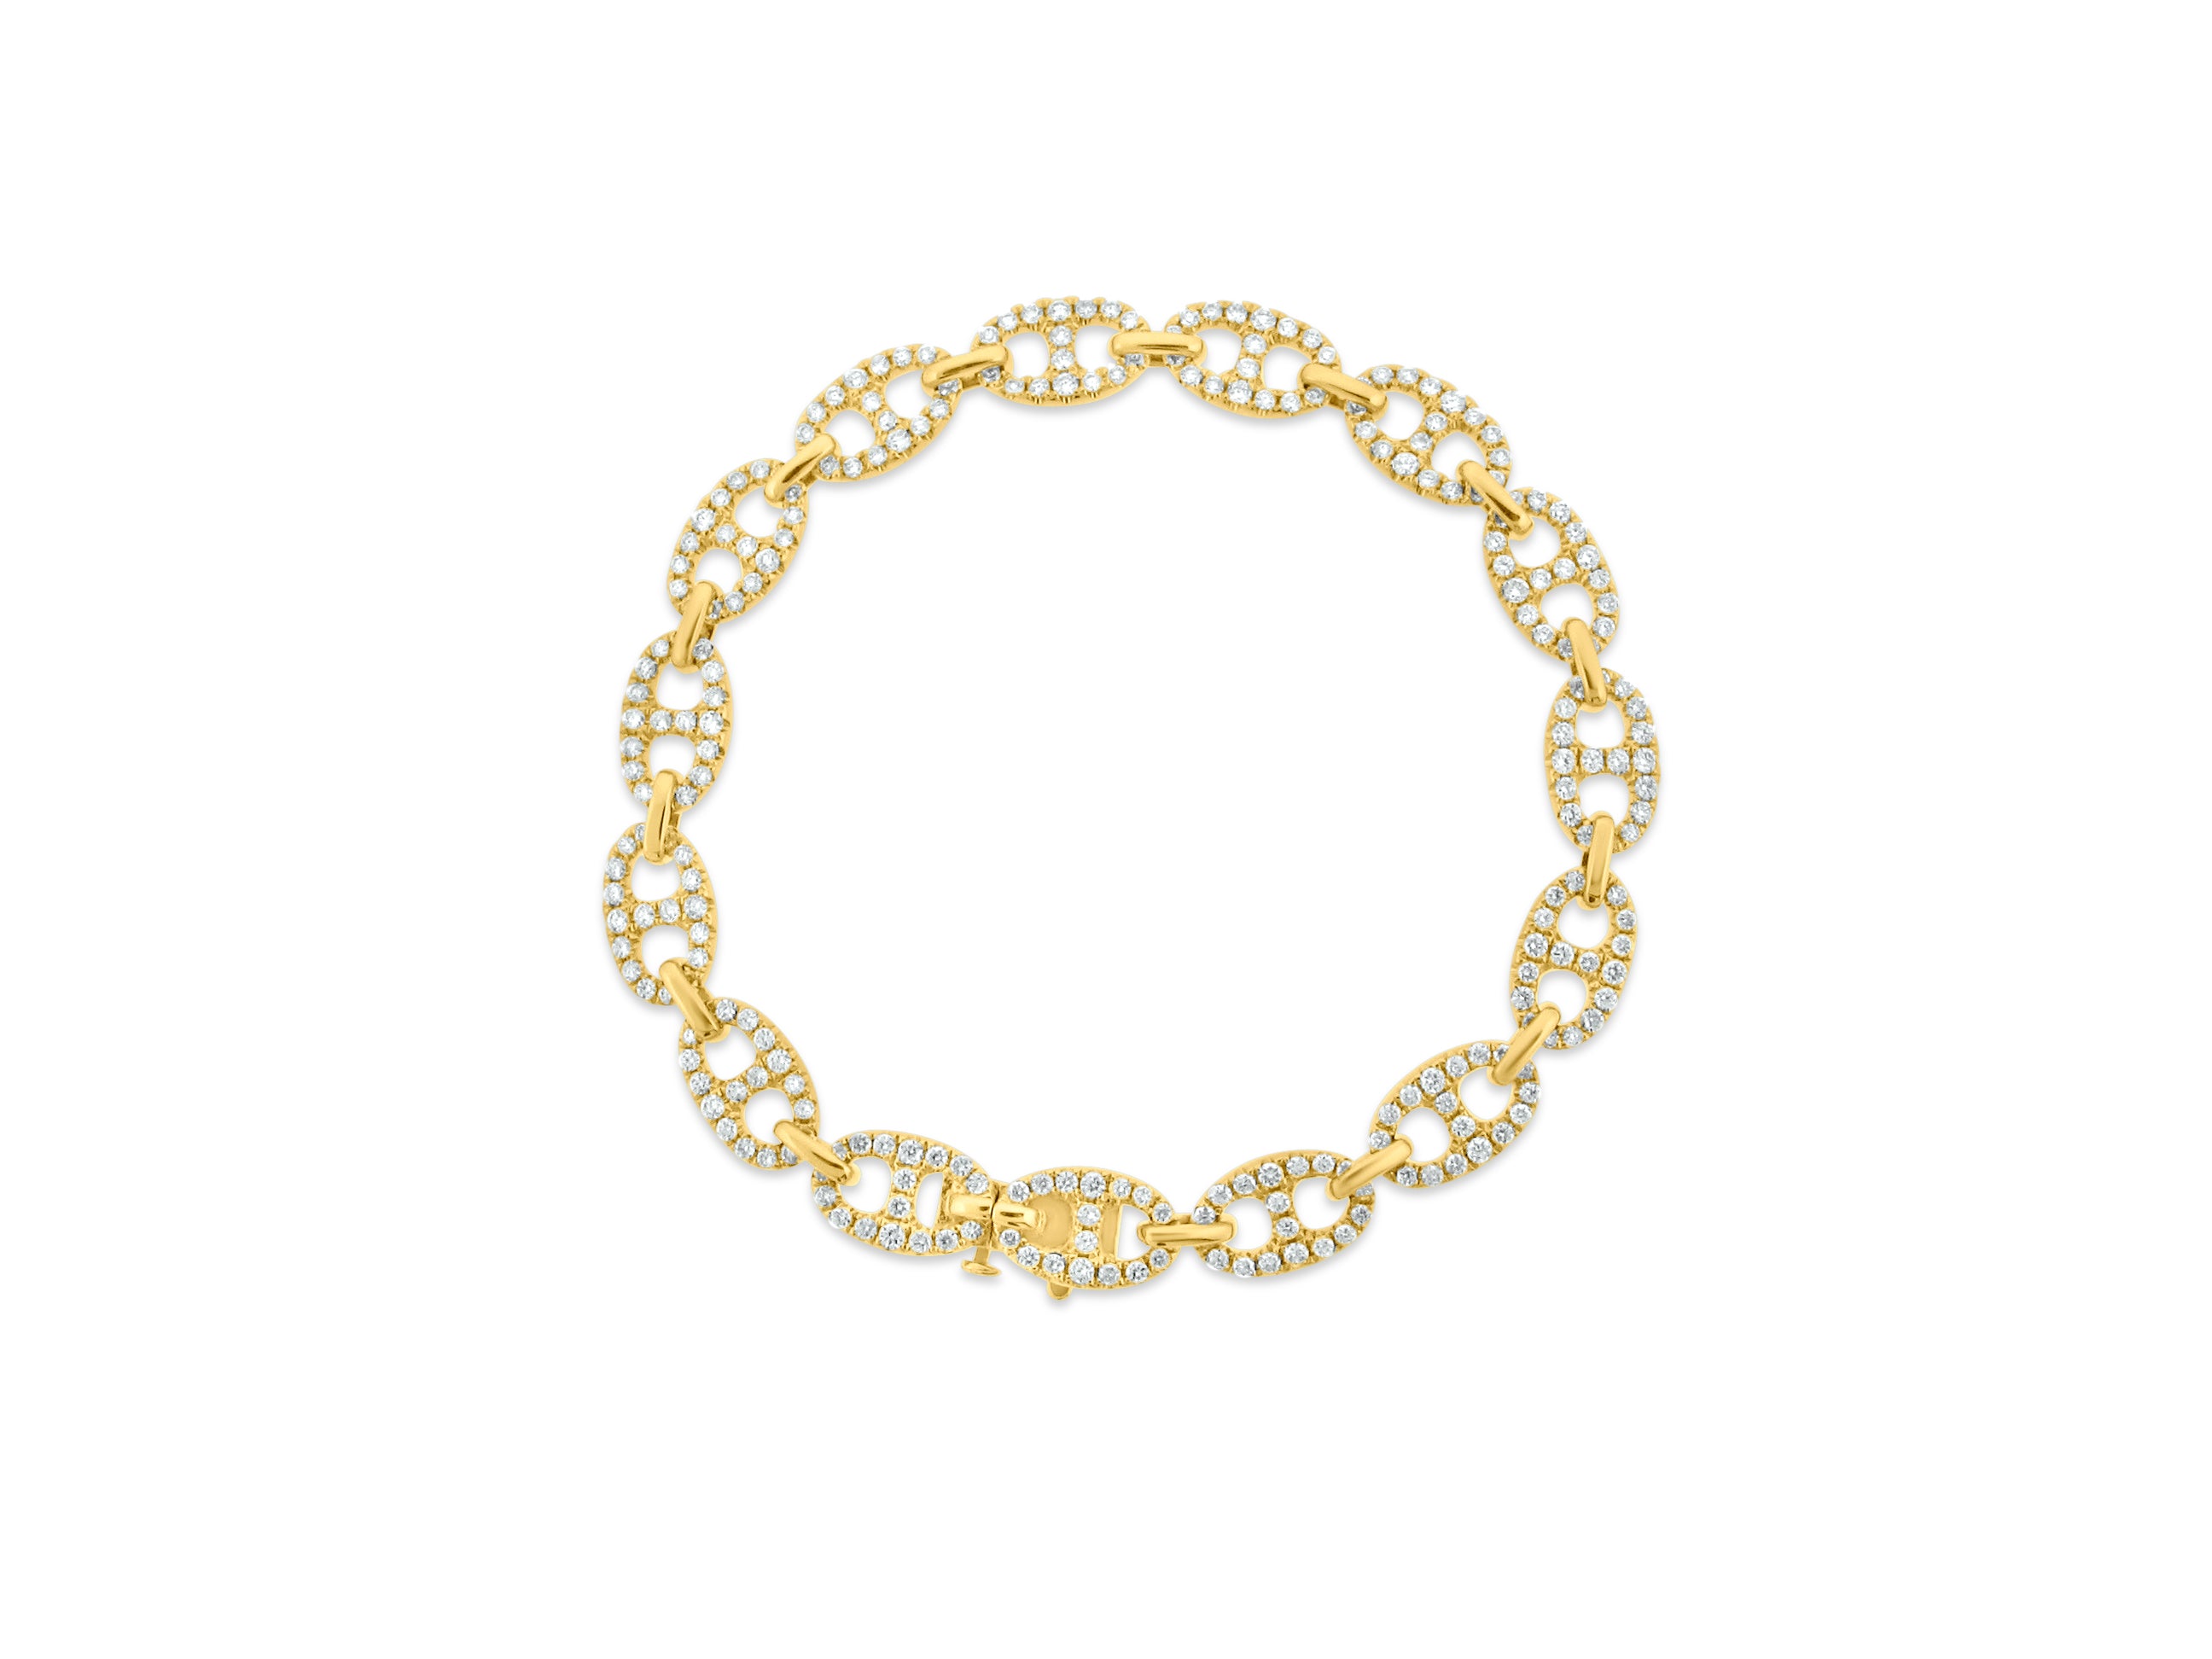 MULLOYS PRIVE'14K YELLOW GOLD 3.25CT SI1-2 CLARITY G-H COLOR  DIAMOND LINK BRACELET